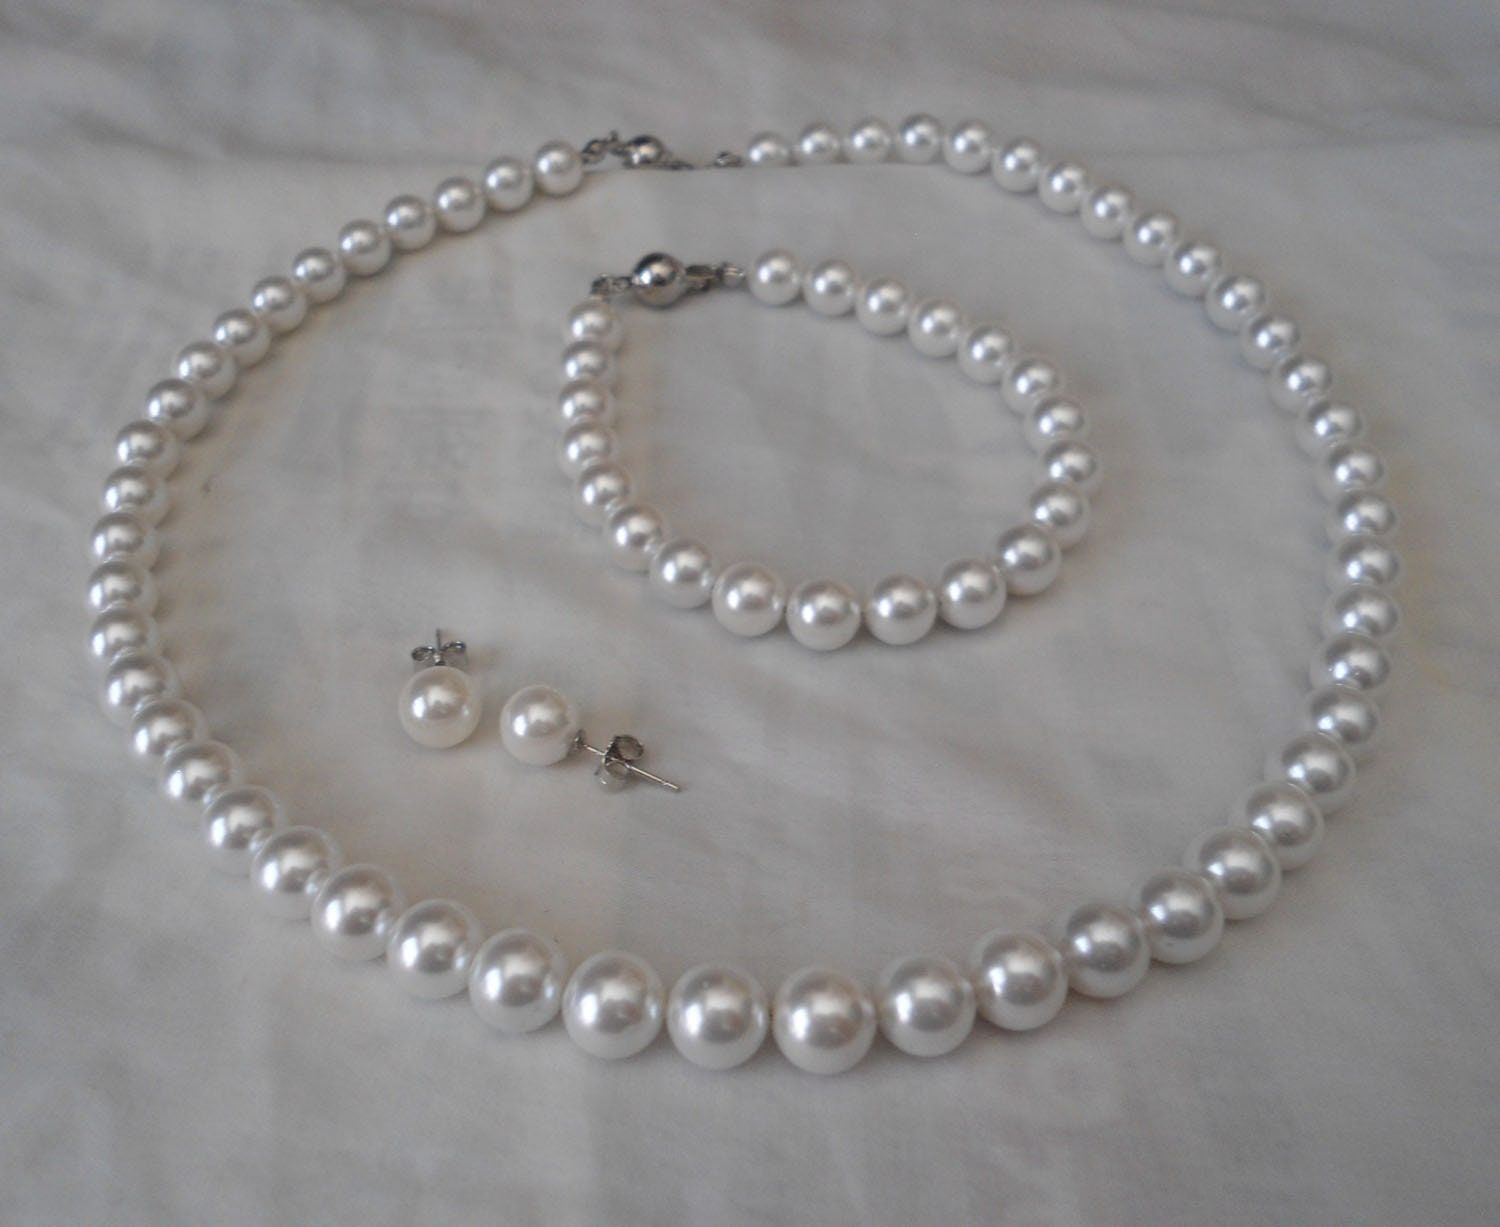 Timeless Elegance: Adorn Yourself with Pearl Jewelry Sets